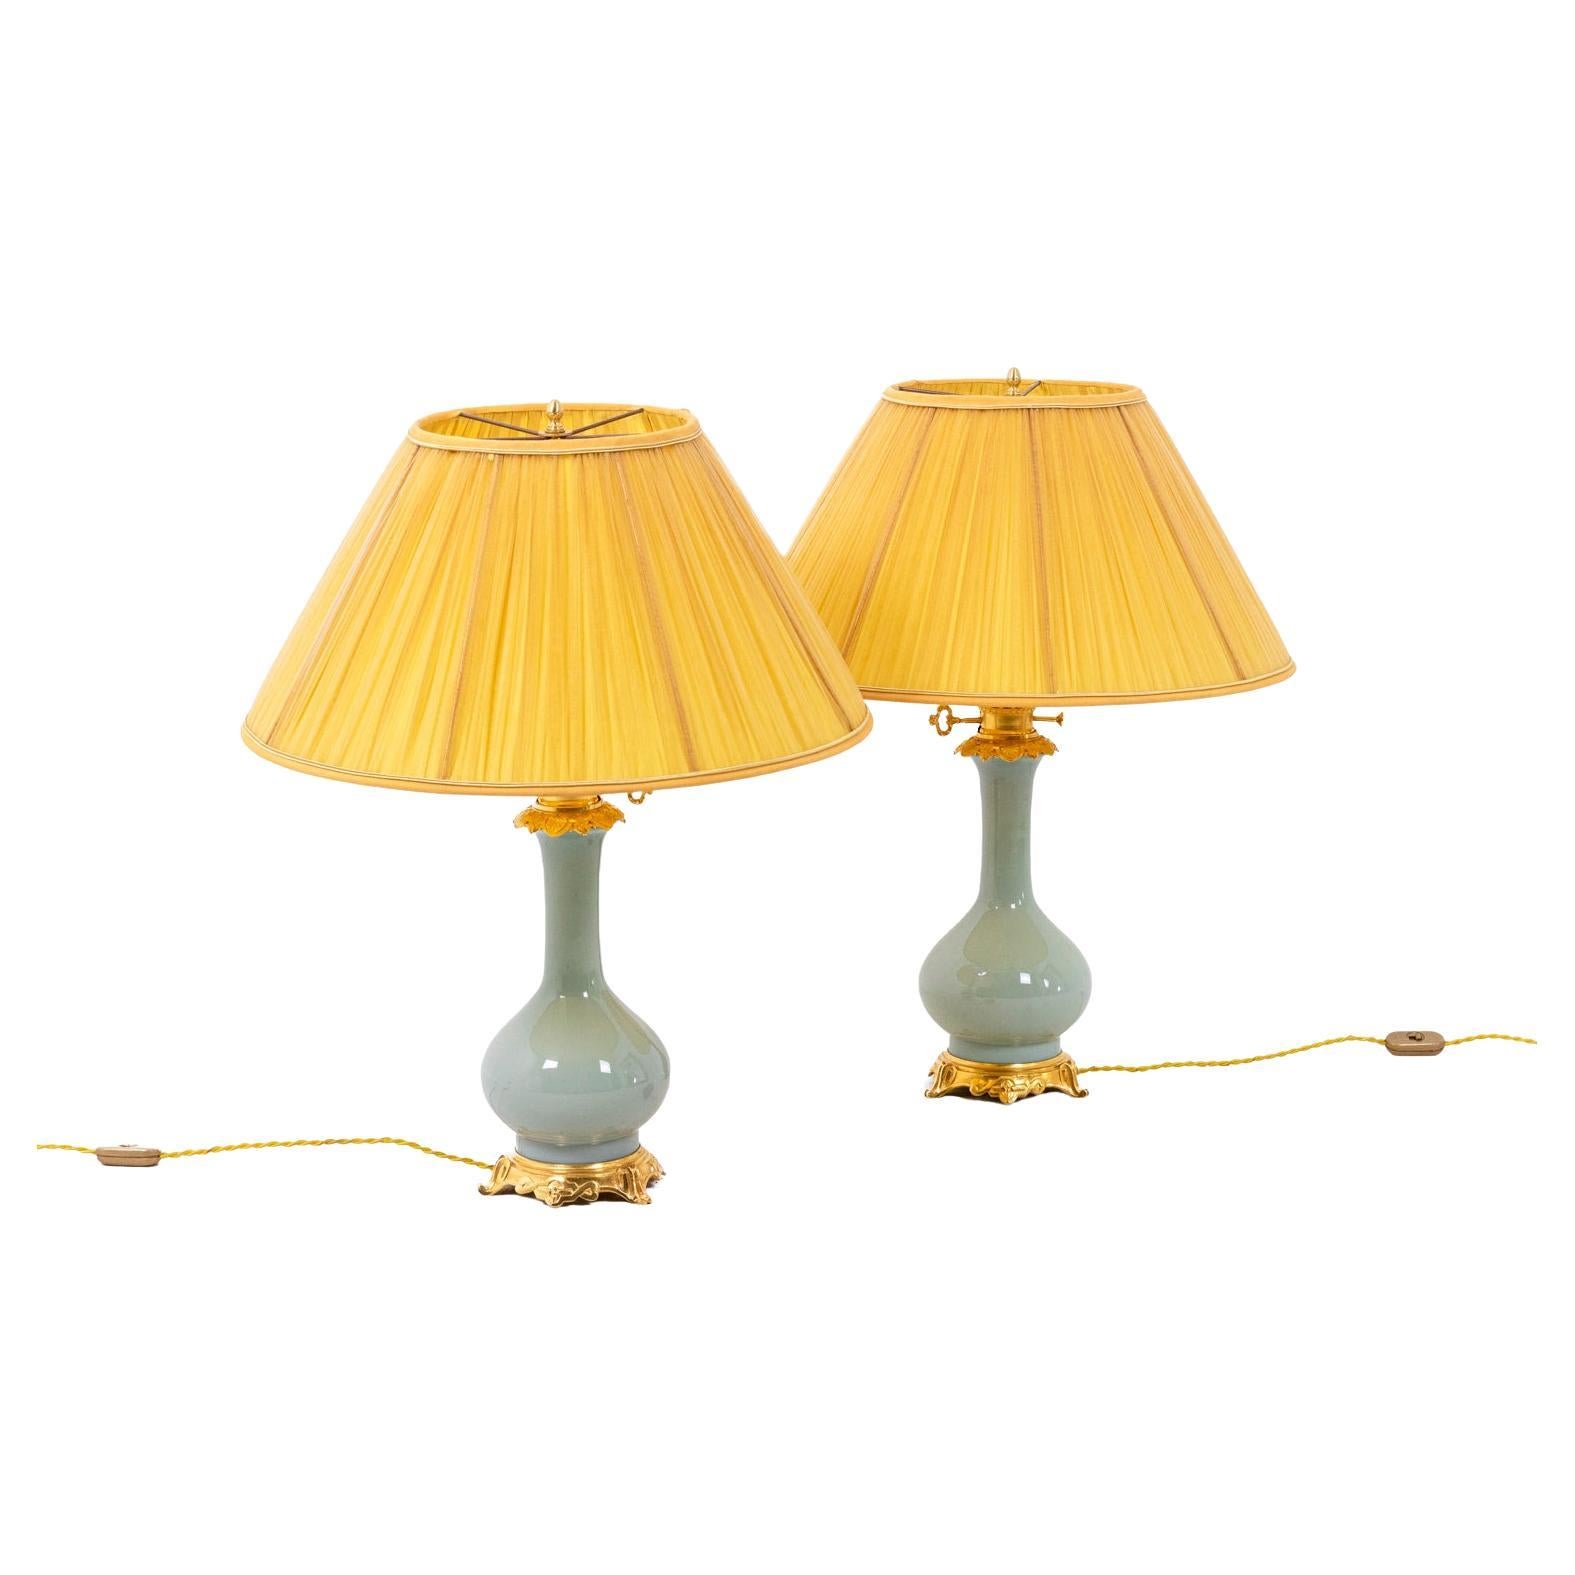 Pair of Lamps in Céladon Porcelain and Gilt Bronze, circa 1880 For Sale